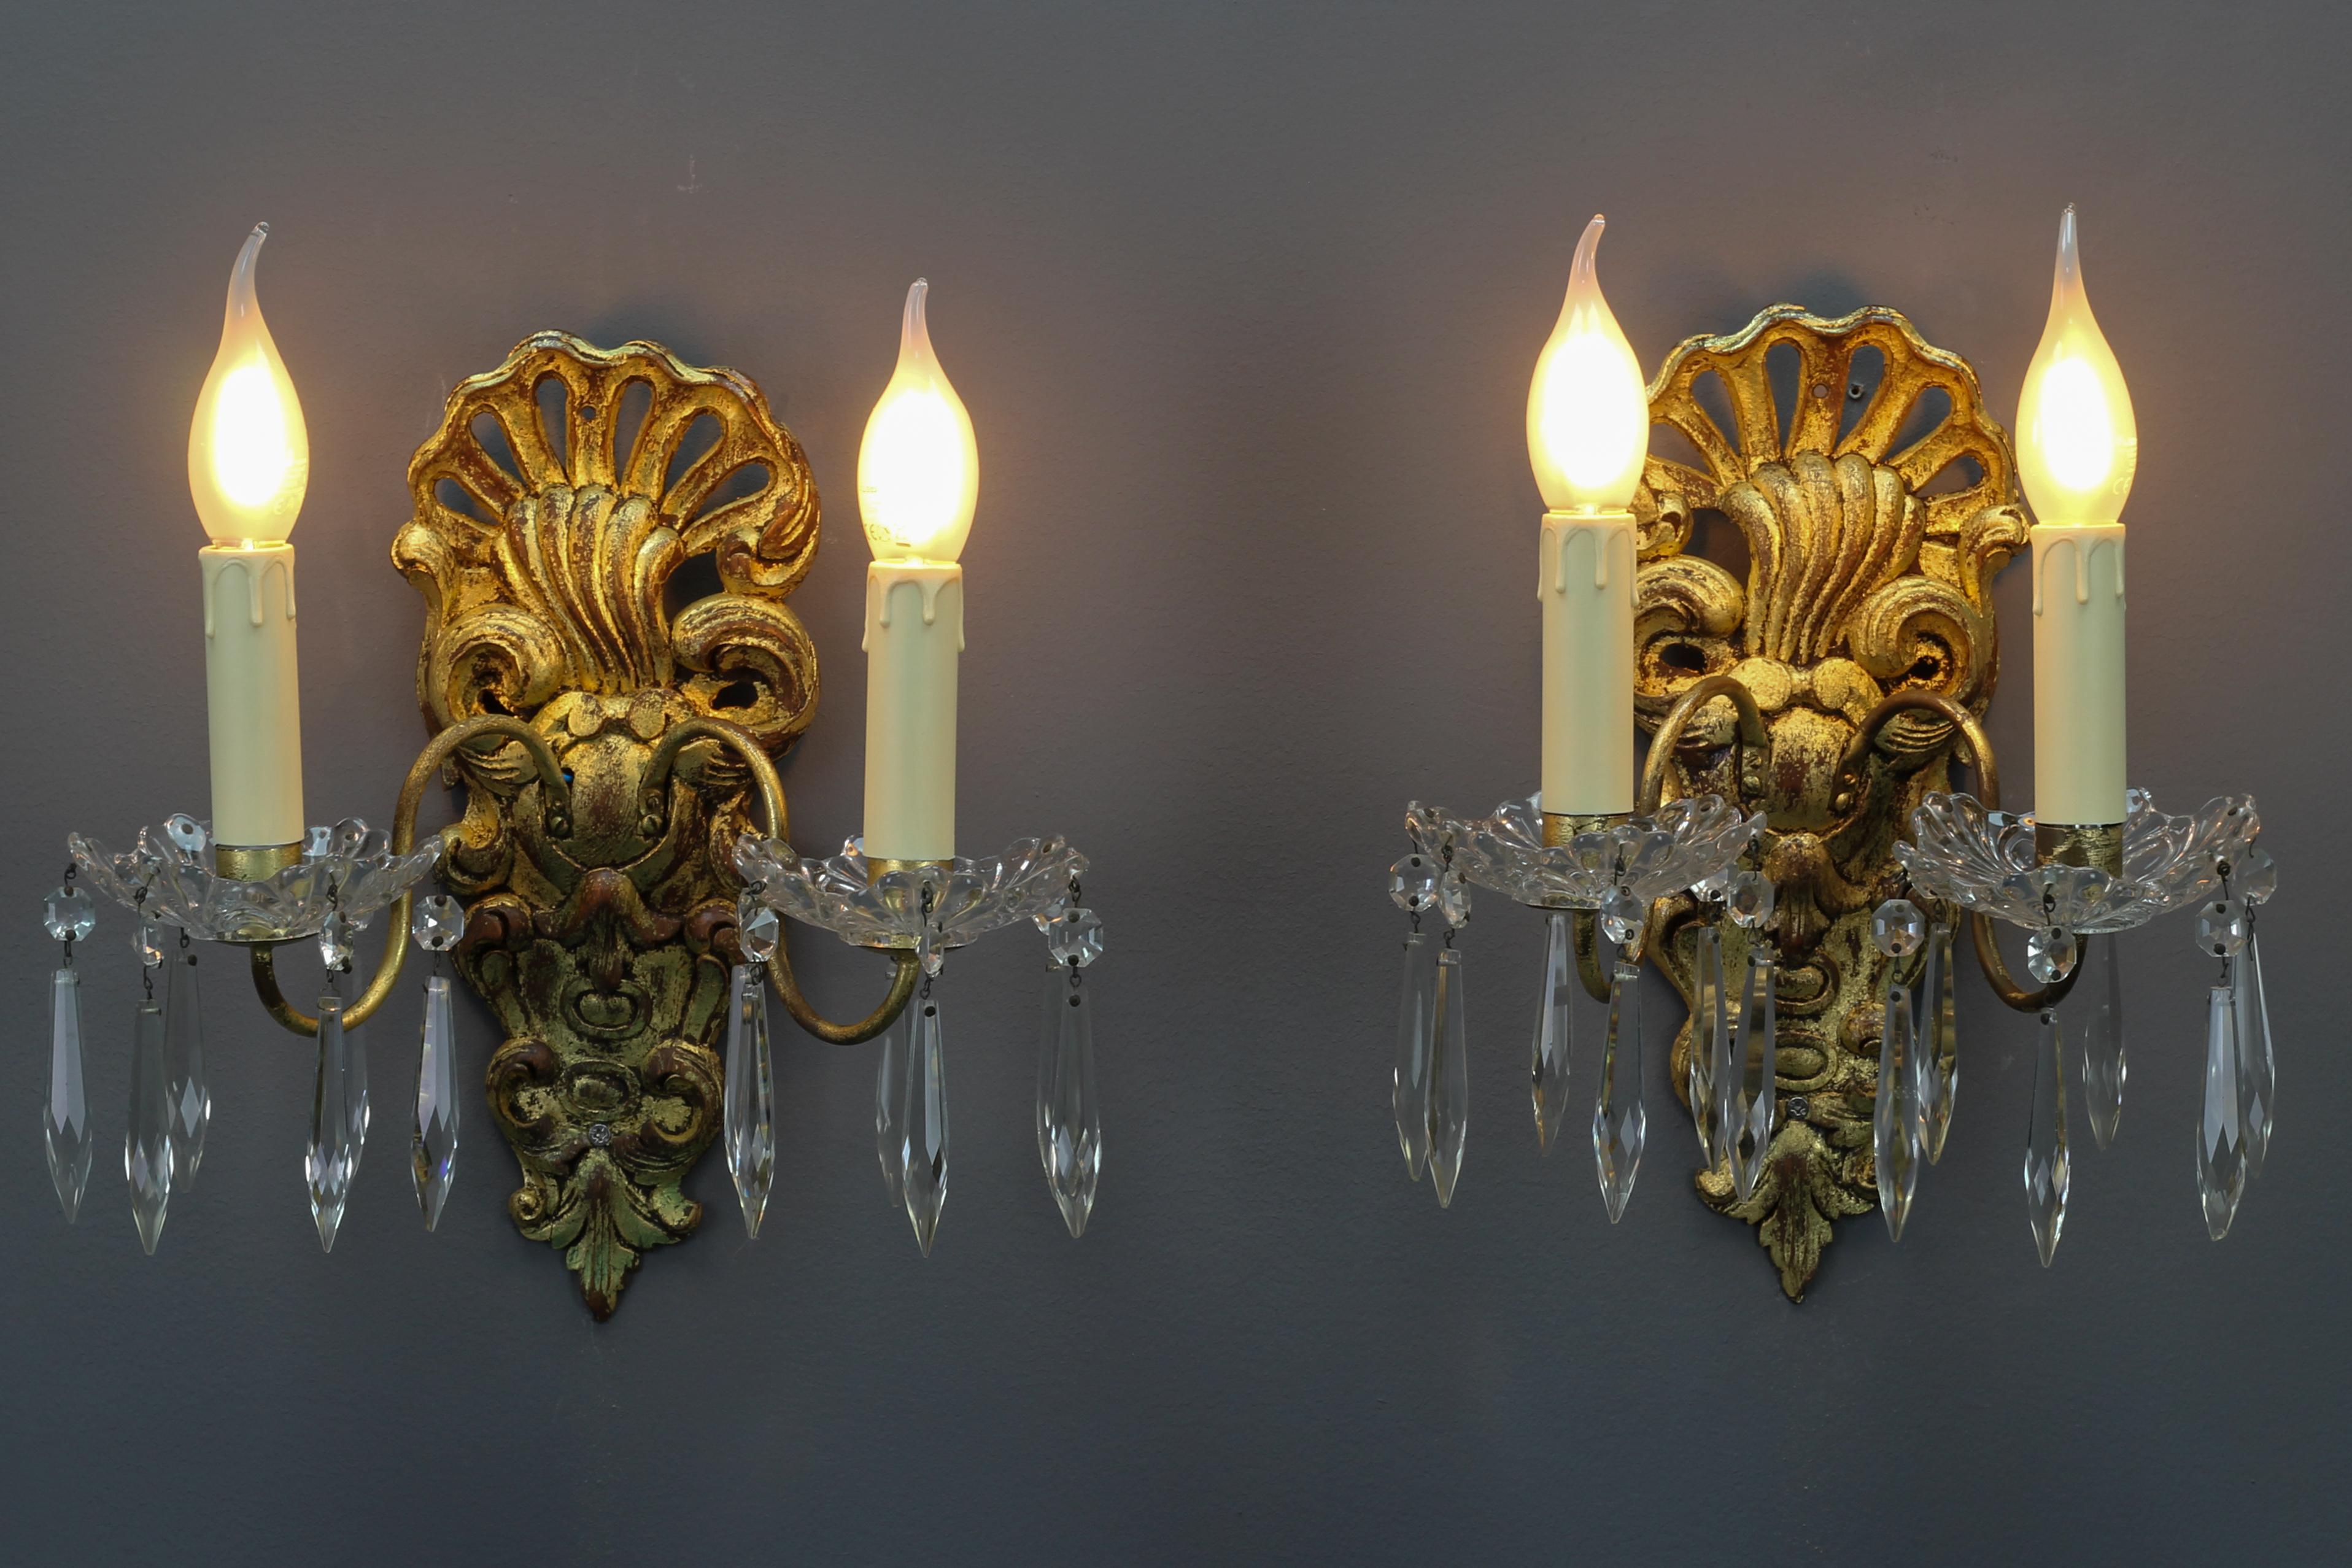 Pair of French Rococo style carved giltwood and crystal glass sconces.
A pair of ornate French Rococo-style carved and gilt wood sconces from the early 20th century. Sconces have been electrified later, have glass bobeches, and are ornate with